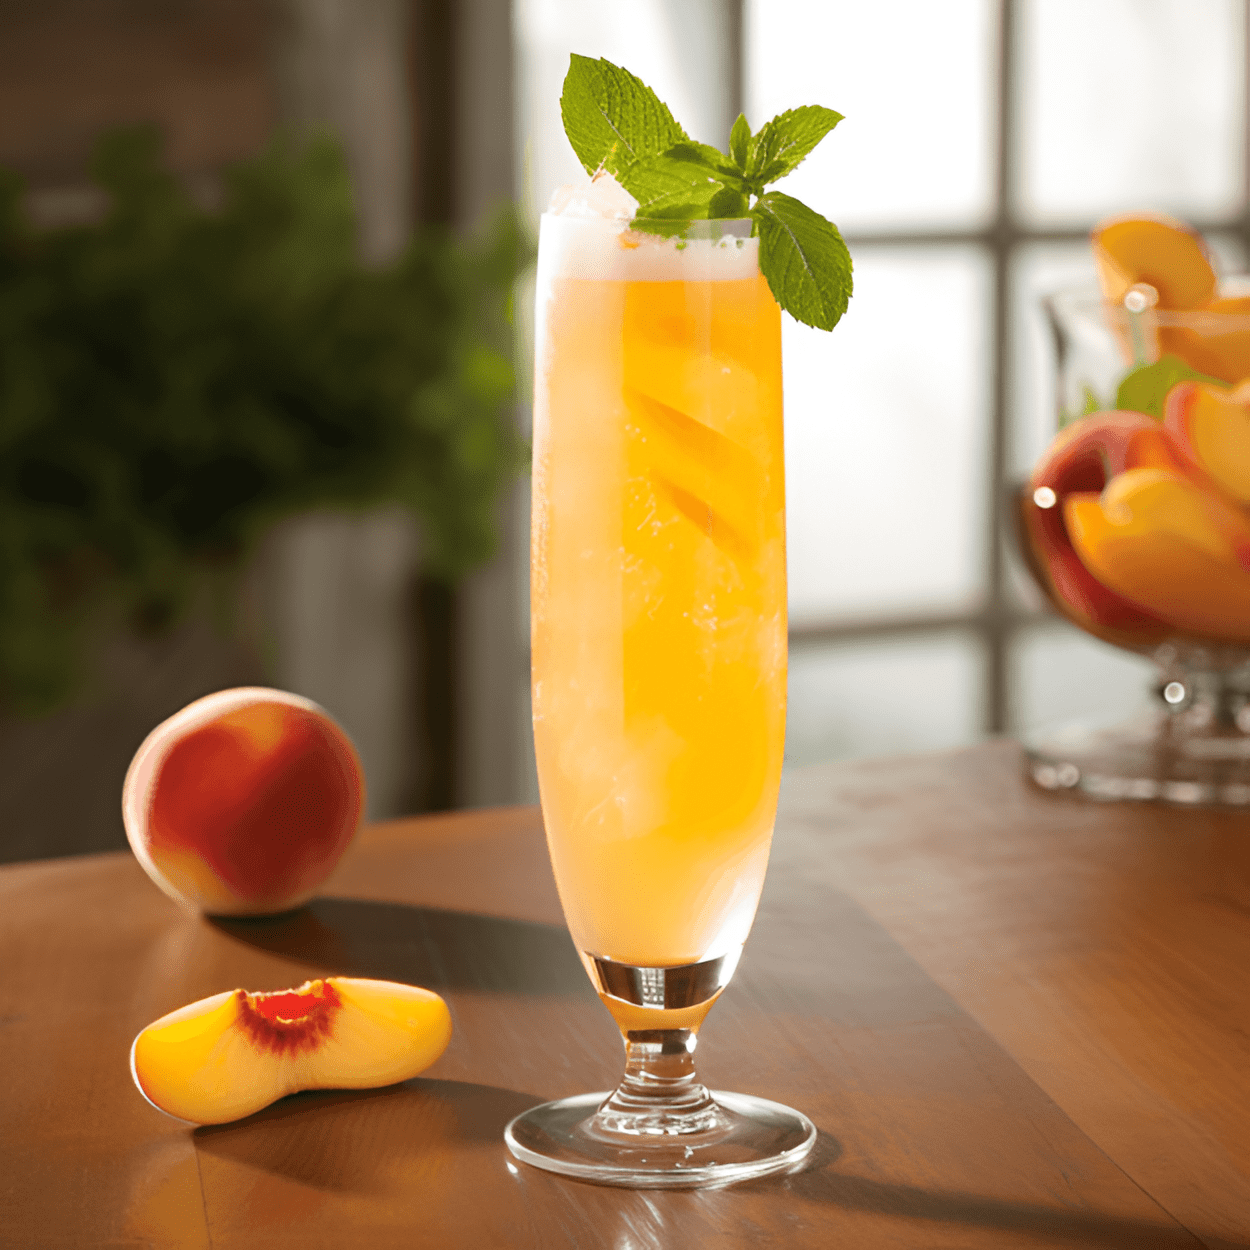 Peach-Basil French 75 Cocktail Recipe - The Peach-Basil French 75 is a harmonious blend of sweet, sour, and herbal flavors. The sweetness of the fresh peach juice is perfectly balanced by the tartness of the lemon juice, while the basil adds a subtle, aromatic complexity. The champagne brings a light, bubbly effervescence that makes this cocktail incredibly refreshing.